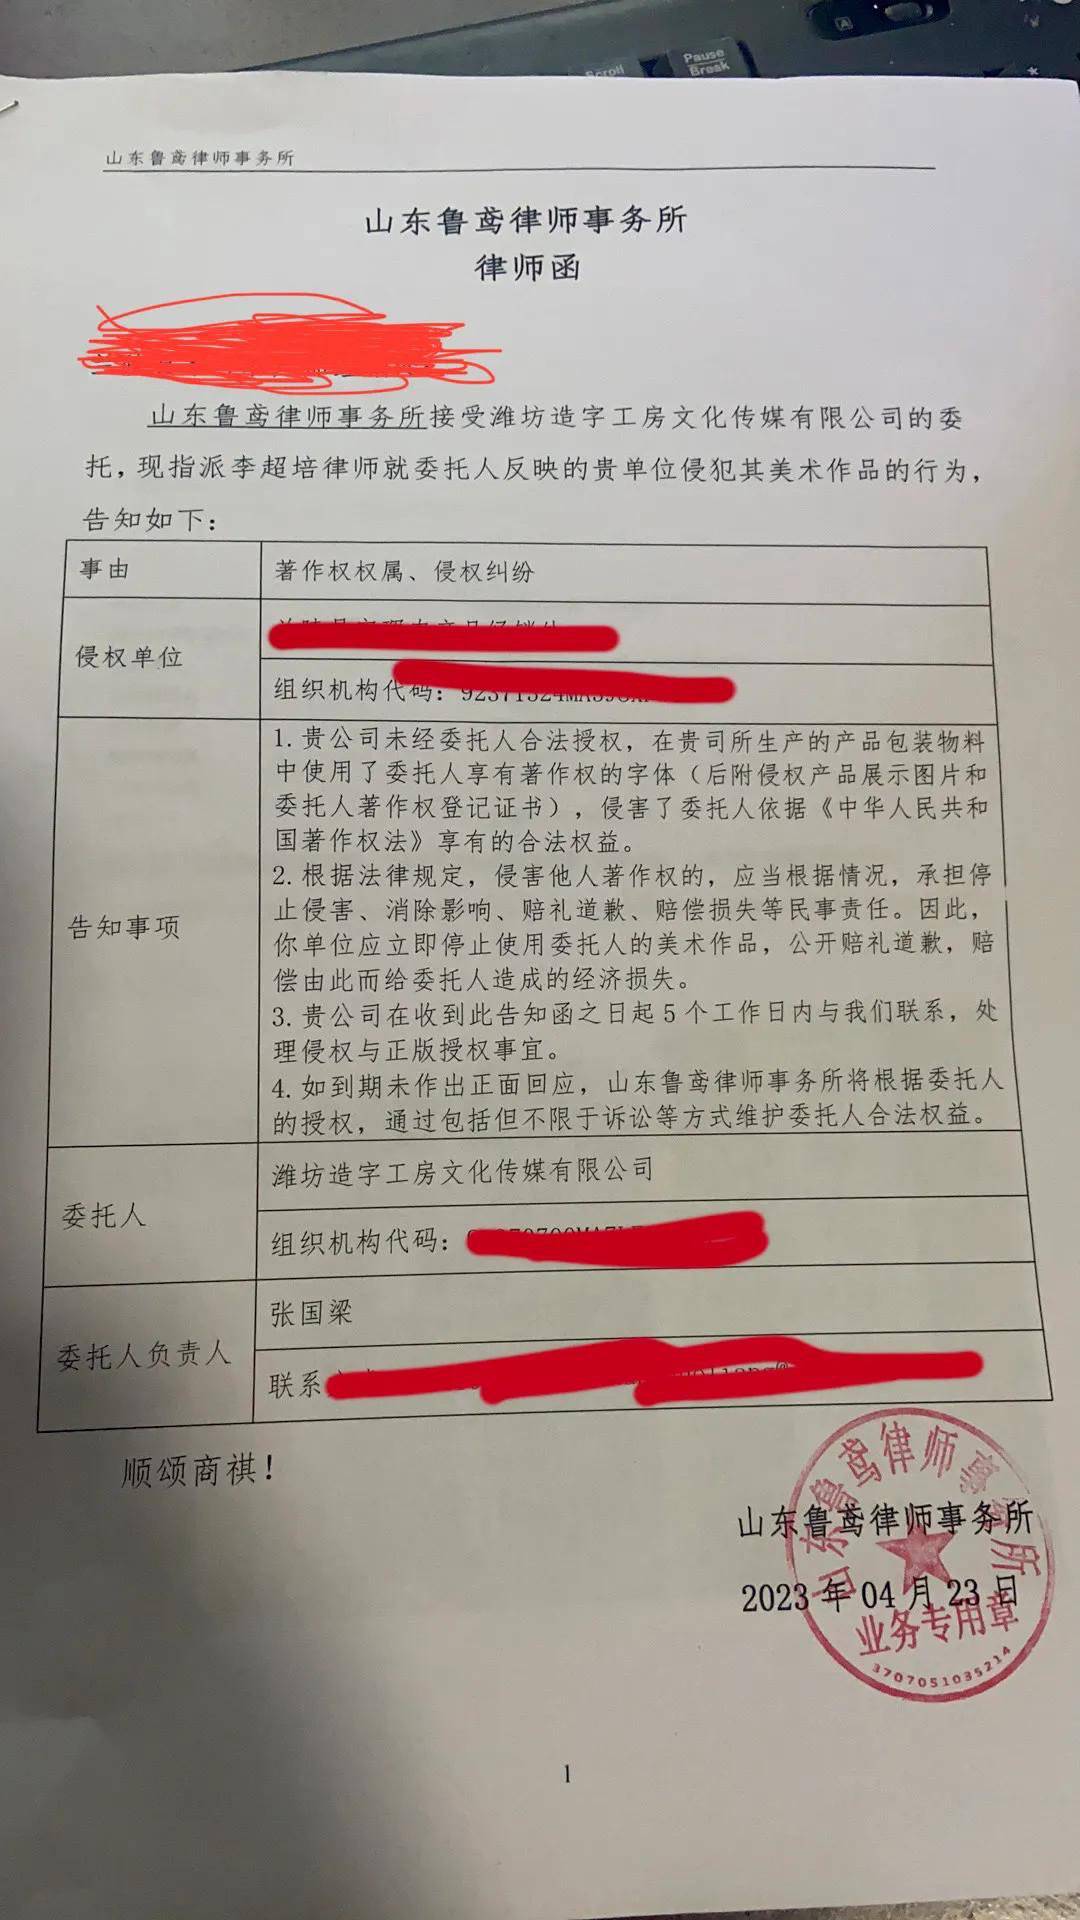 Track to the end|A few words on the product packaging "recruit" a lawyer's letter: font infringement, need 20,000 yuan to settle